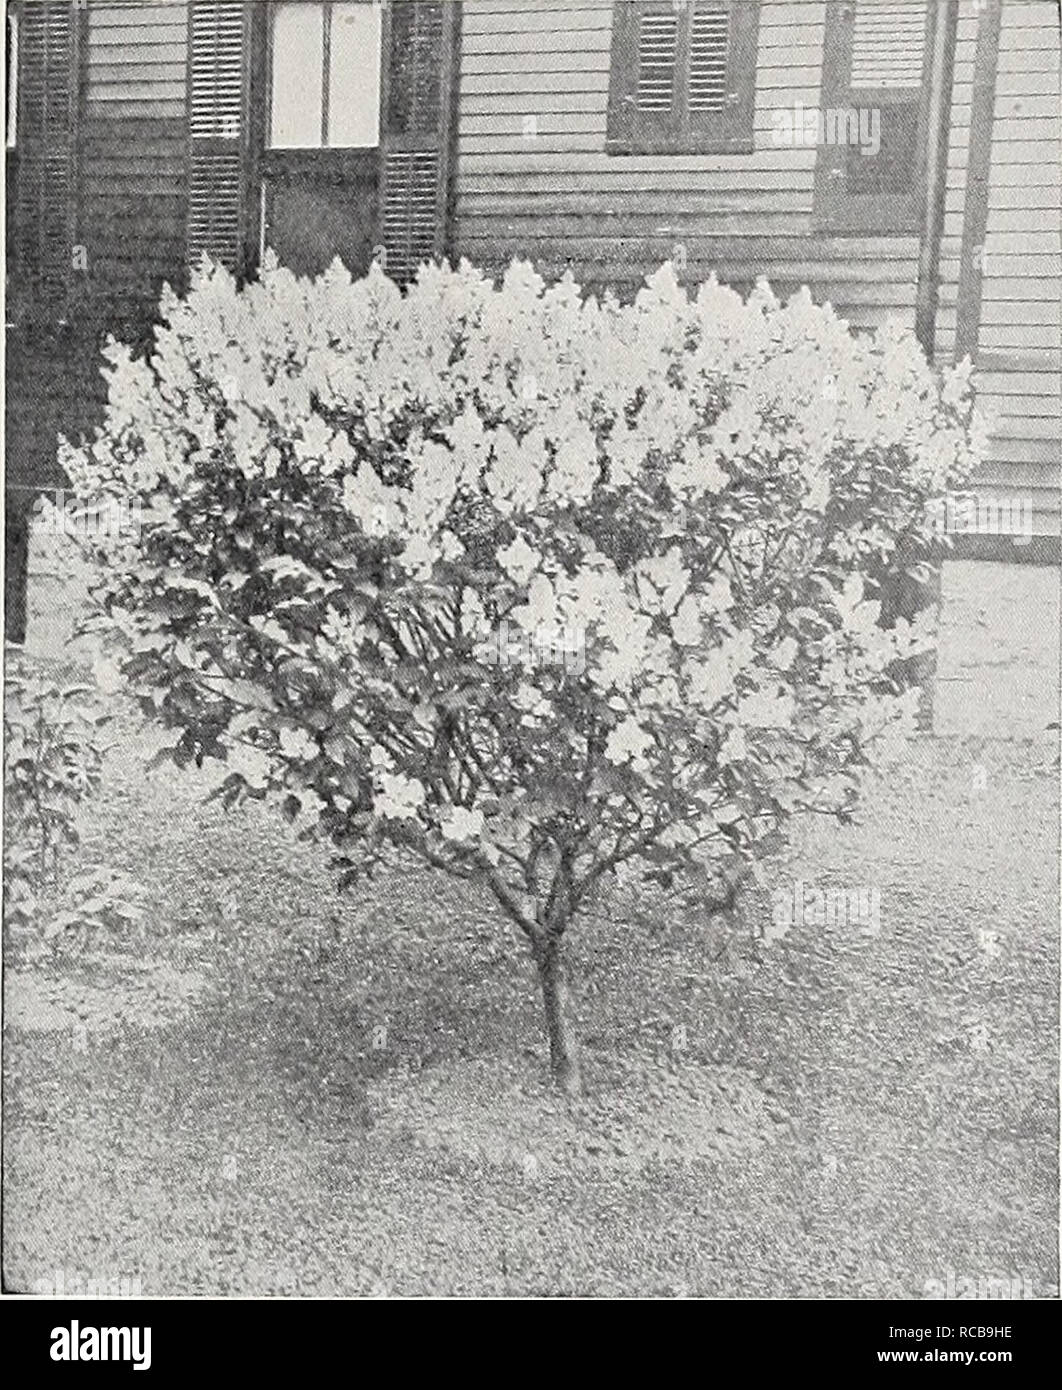 . Ellwanger &amp; Barry : Mount Hope nurseries. GENERAL CATALOGUE. 85 Spiraea rotundifolia alba. D. Leaves roundish; flowers white. A dis- tinct variety. 35c. S. salicifolia. Willow-leaved Spiraea. D. Long, narrow, pointed leaves, and rose-colored flowers in June and July. 35c. S. sorbifolia. Sorb-leaved Spiraea. D. A vigorous species, with leaves like those of the Mountain Ash, and long, elegant spikes of white flowers in July. 35c. S. Thunbergii. Thunberg's Spiraea. D. Of dwarf habit and rounded, graceful form ; branches slender and somewhat drooping; foliage narrow and yellowish green ; flo Stock Photo